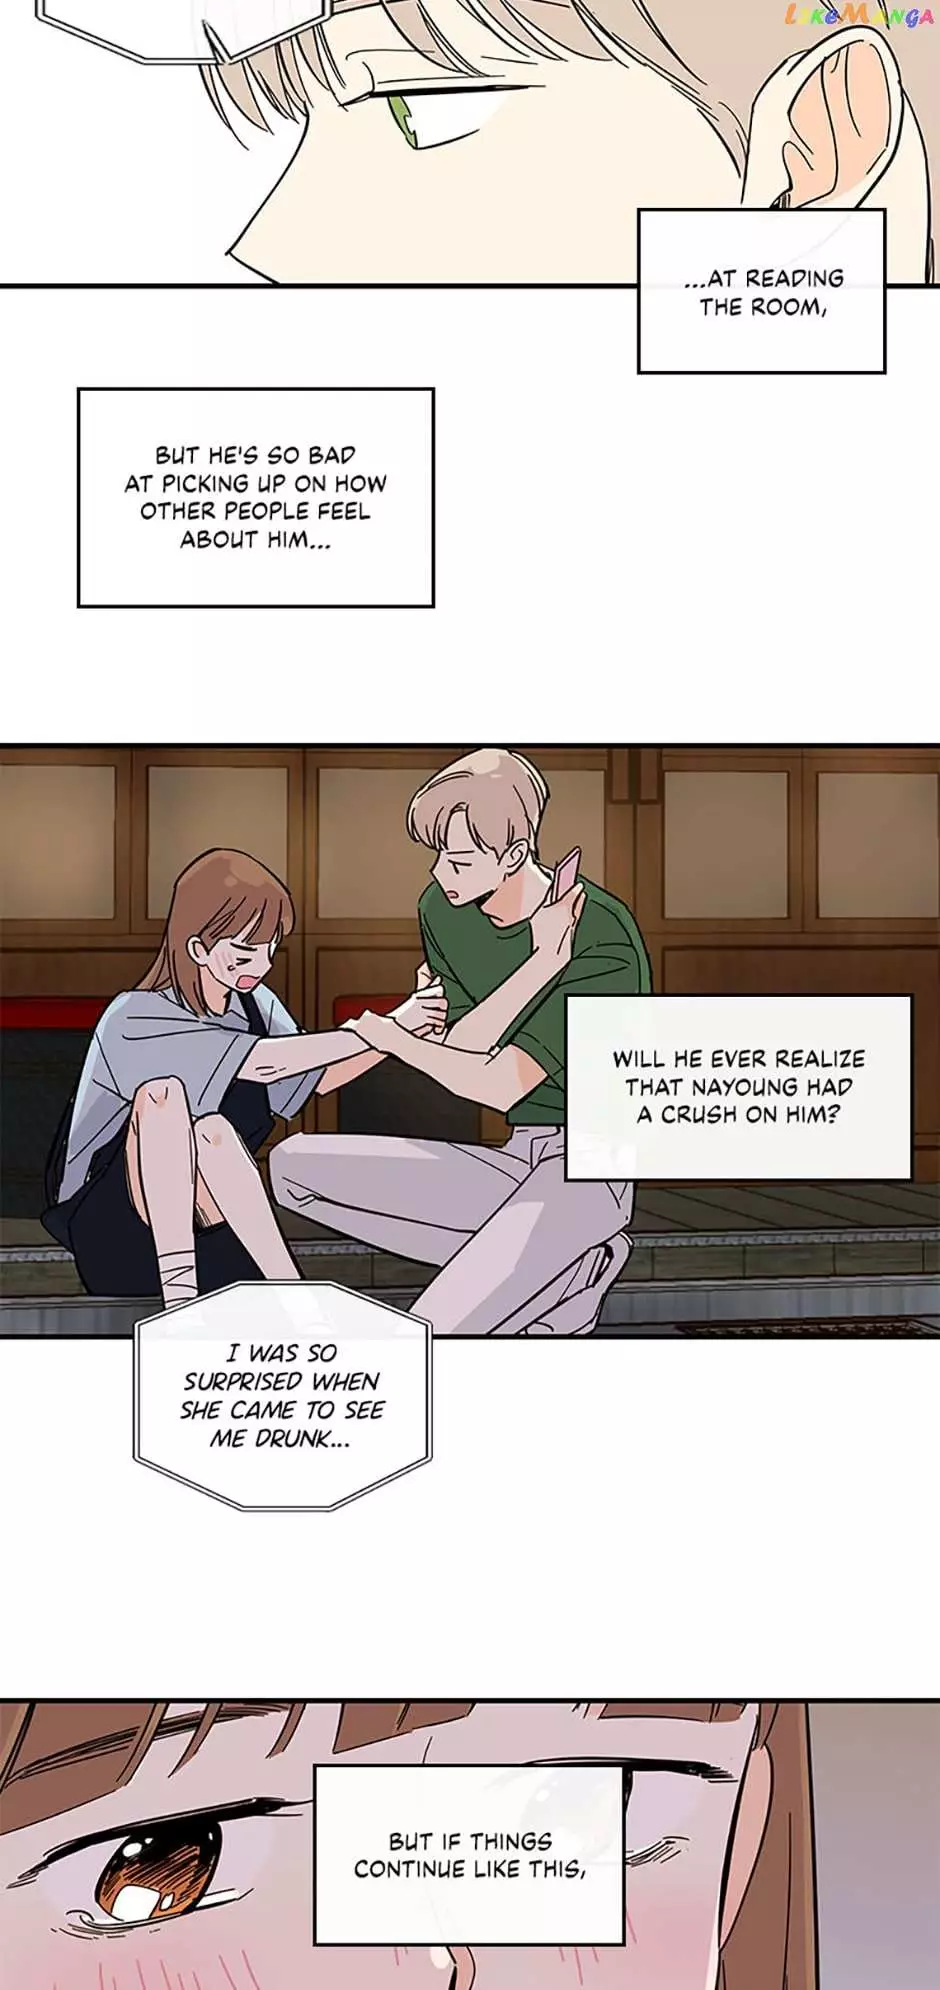 How We Love - 93 page 15-a2d0eda1